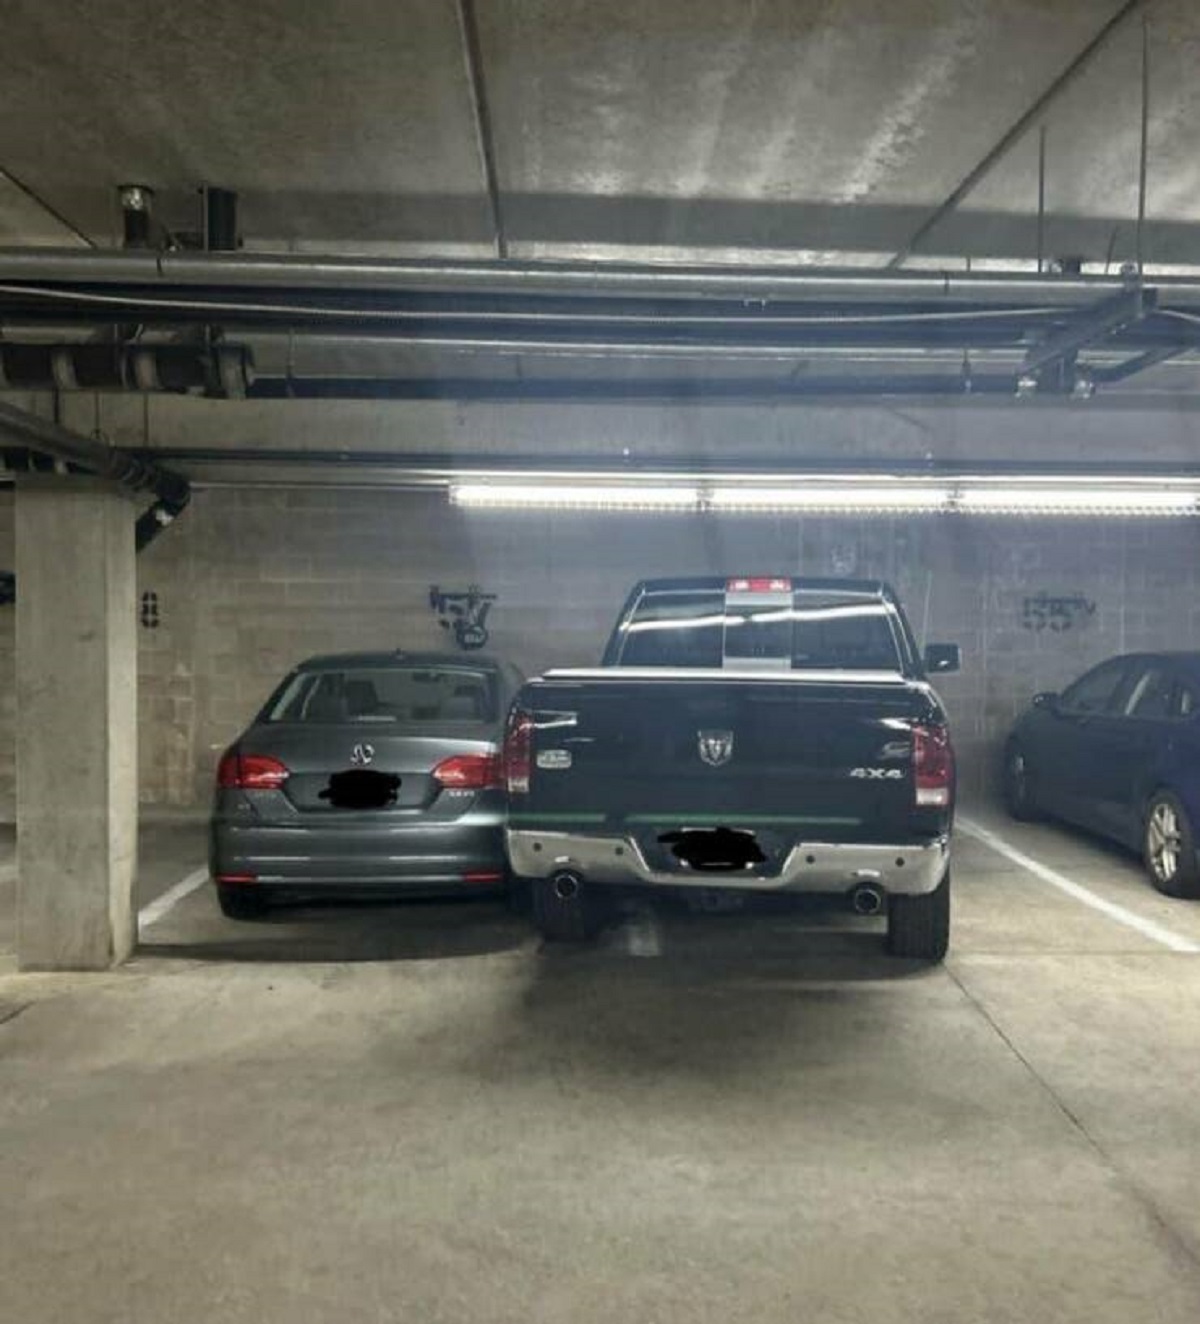 This person's neighbor purposely blocked them in because they didn't like how they parked: